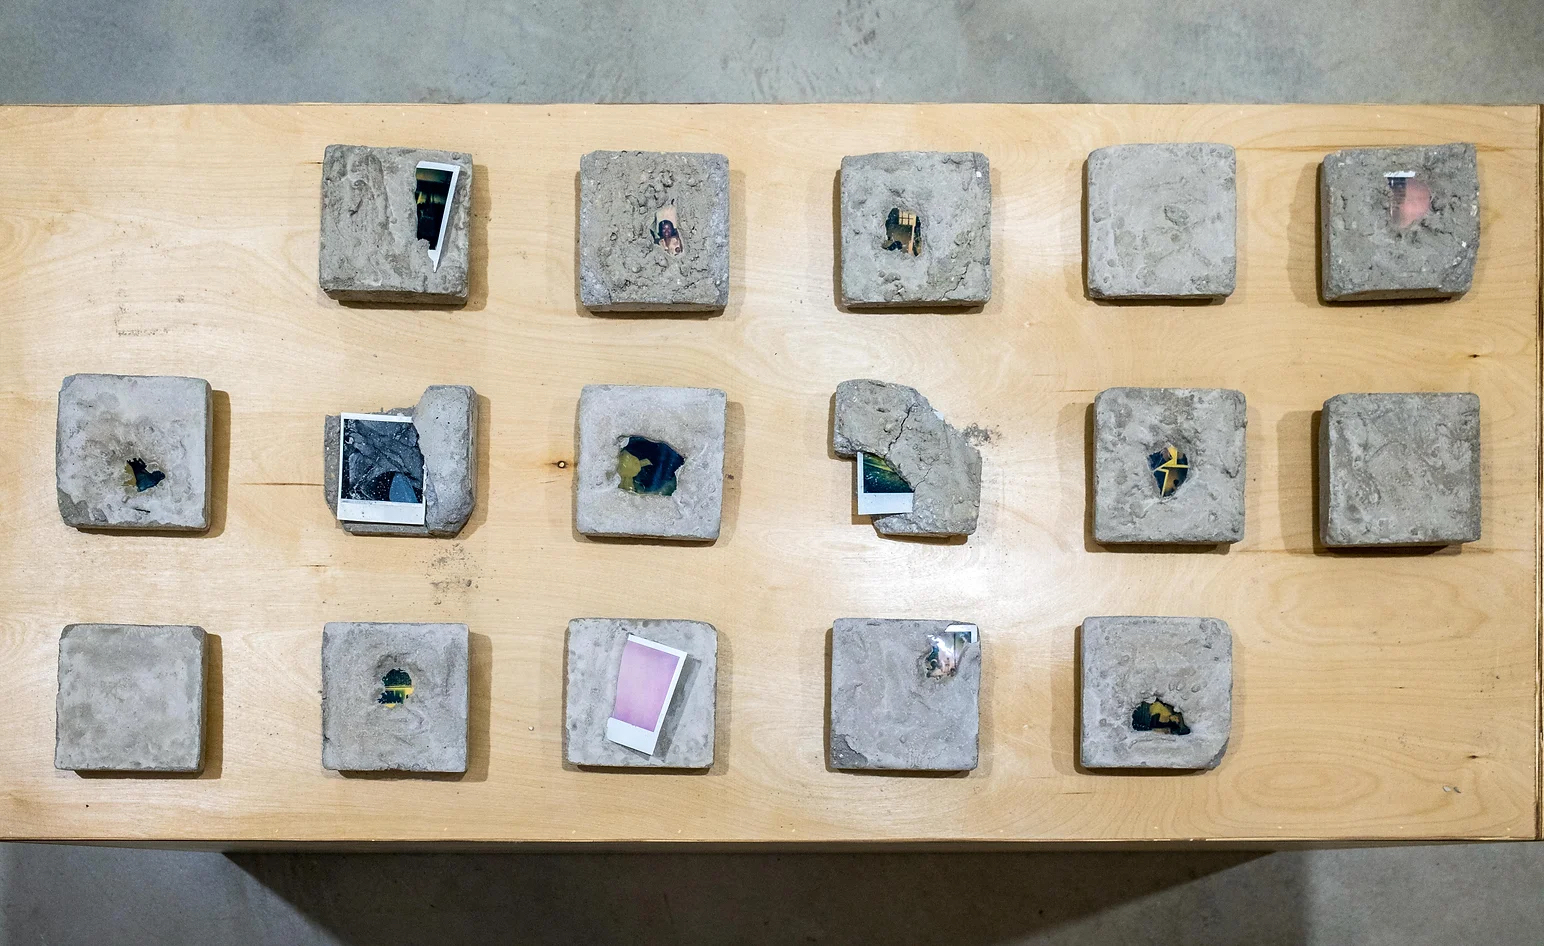 Image: An installation view of the 2002 work, In Remembrance of Us. Fifteen squares of concrete are seen from above and arranged in three rows on a wooden table. Each square is different and many have Polaroid photographs pressed into them. Photo courtesy of Sibyl Gallery.